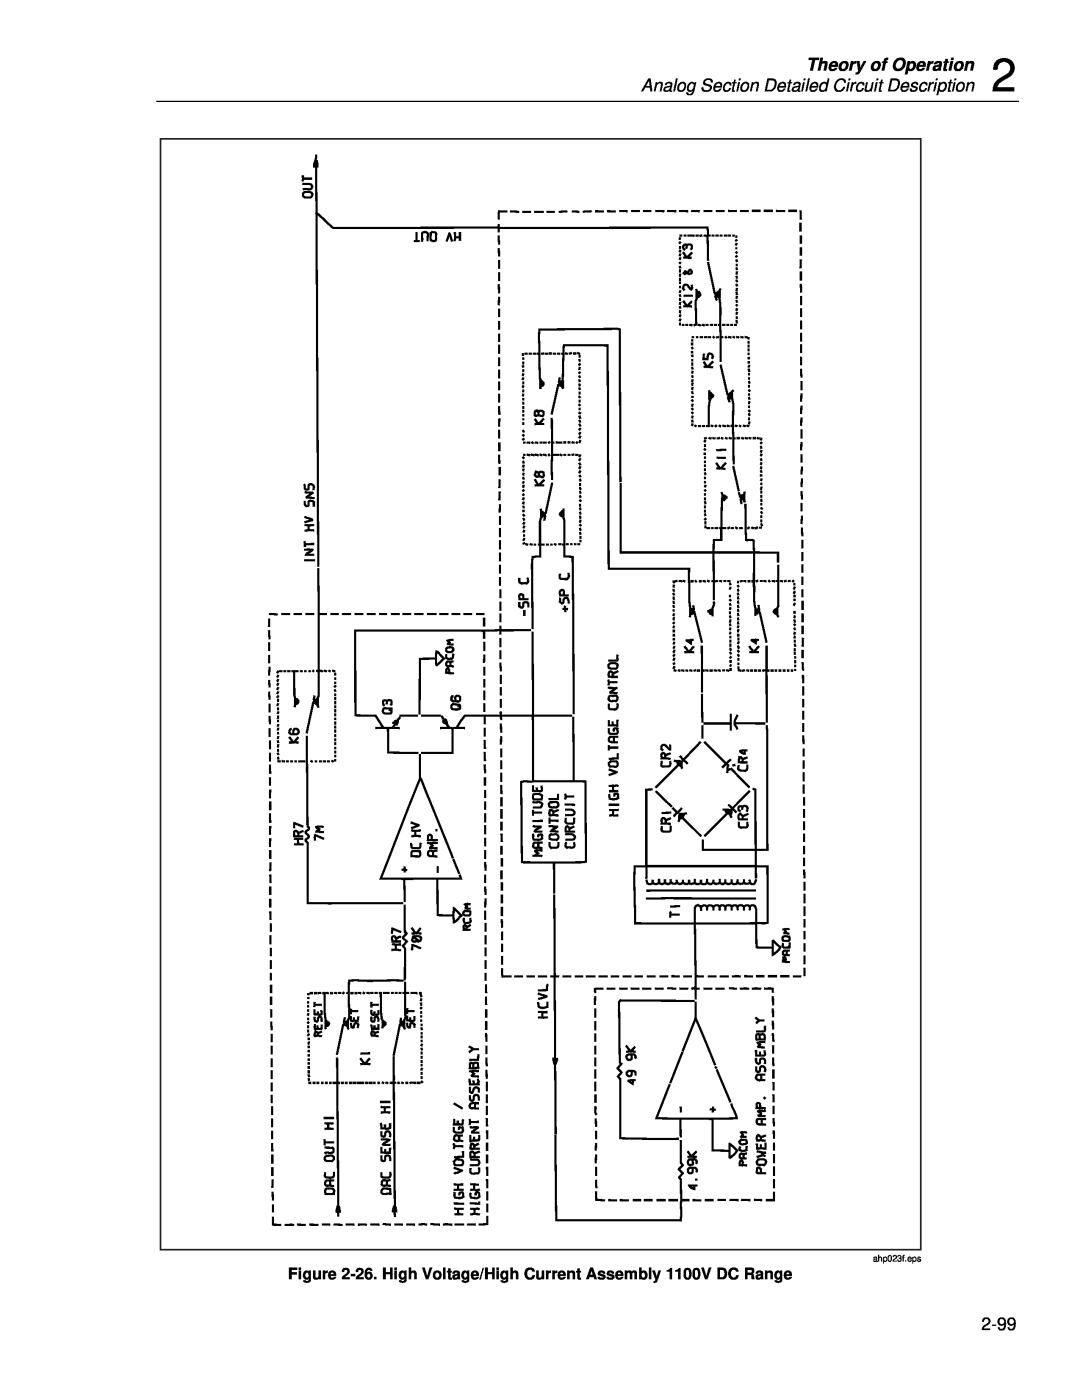 Fluke 5720A service manual Theory of Operation, Analog Section Detailed Circuit Description, ahp023f.eps 